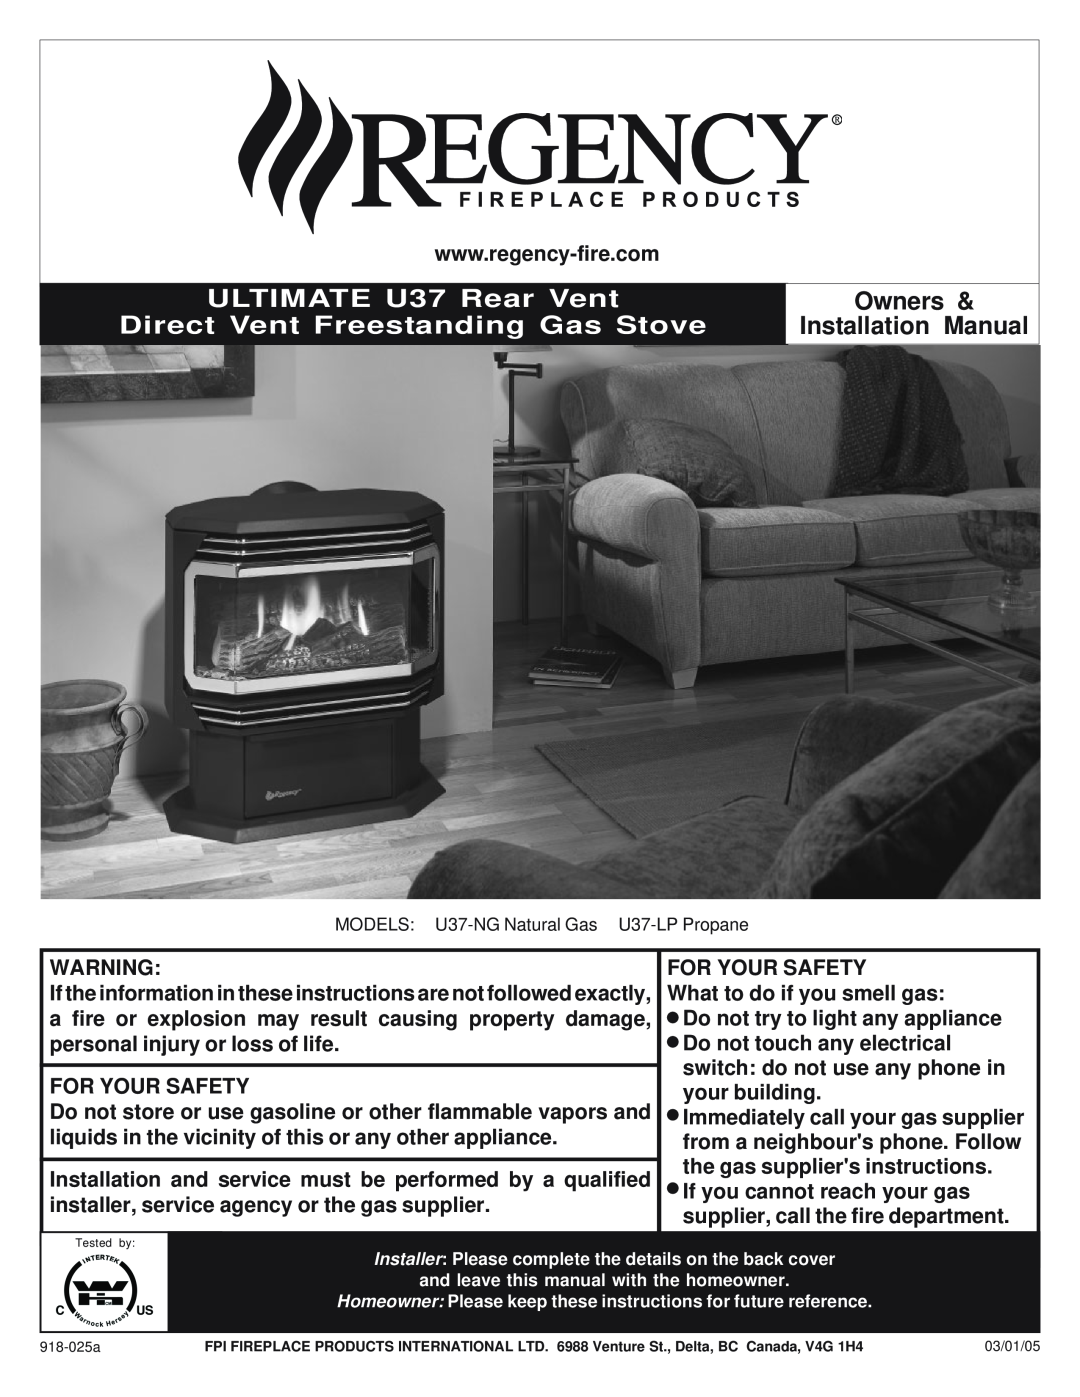 Regency U37-NG NATURAL GAS installation manual ULTIMATE U37 Rear Vent, Owners, Direct Vent Freestanding Gas Stove 